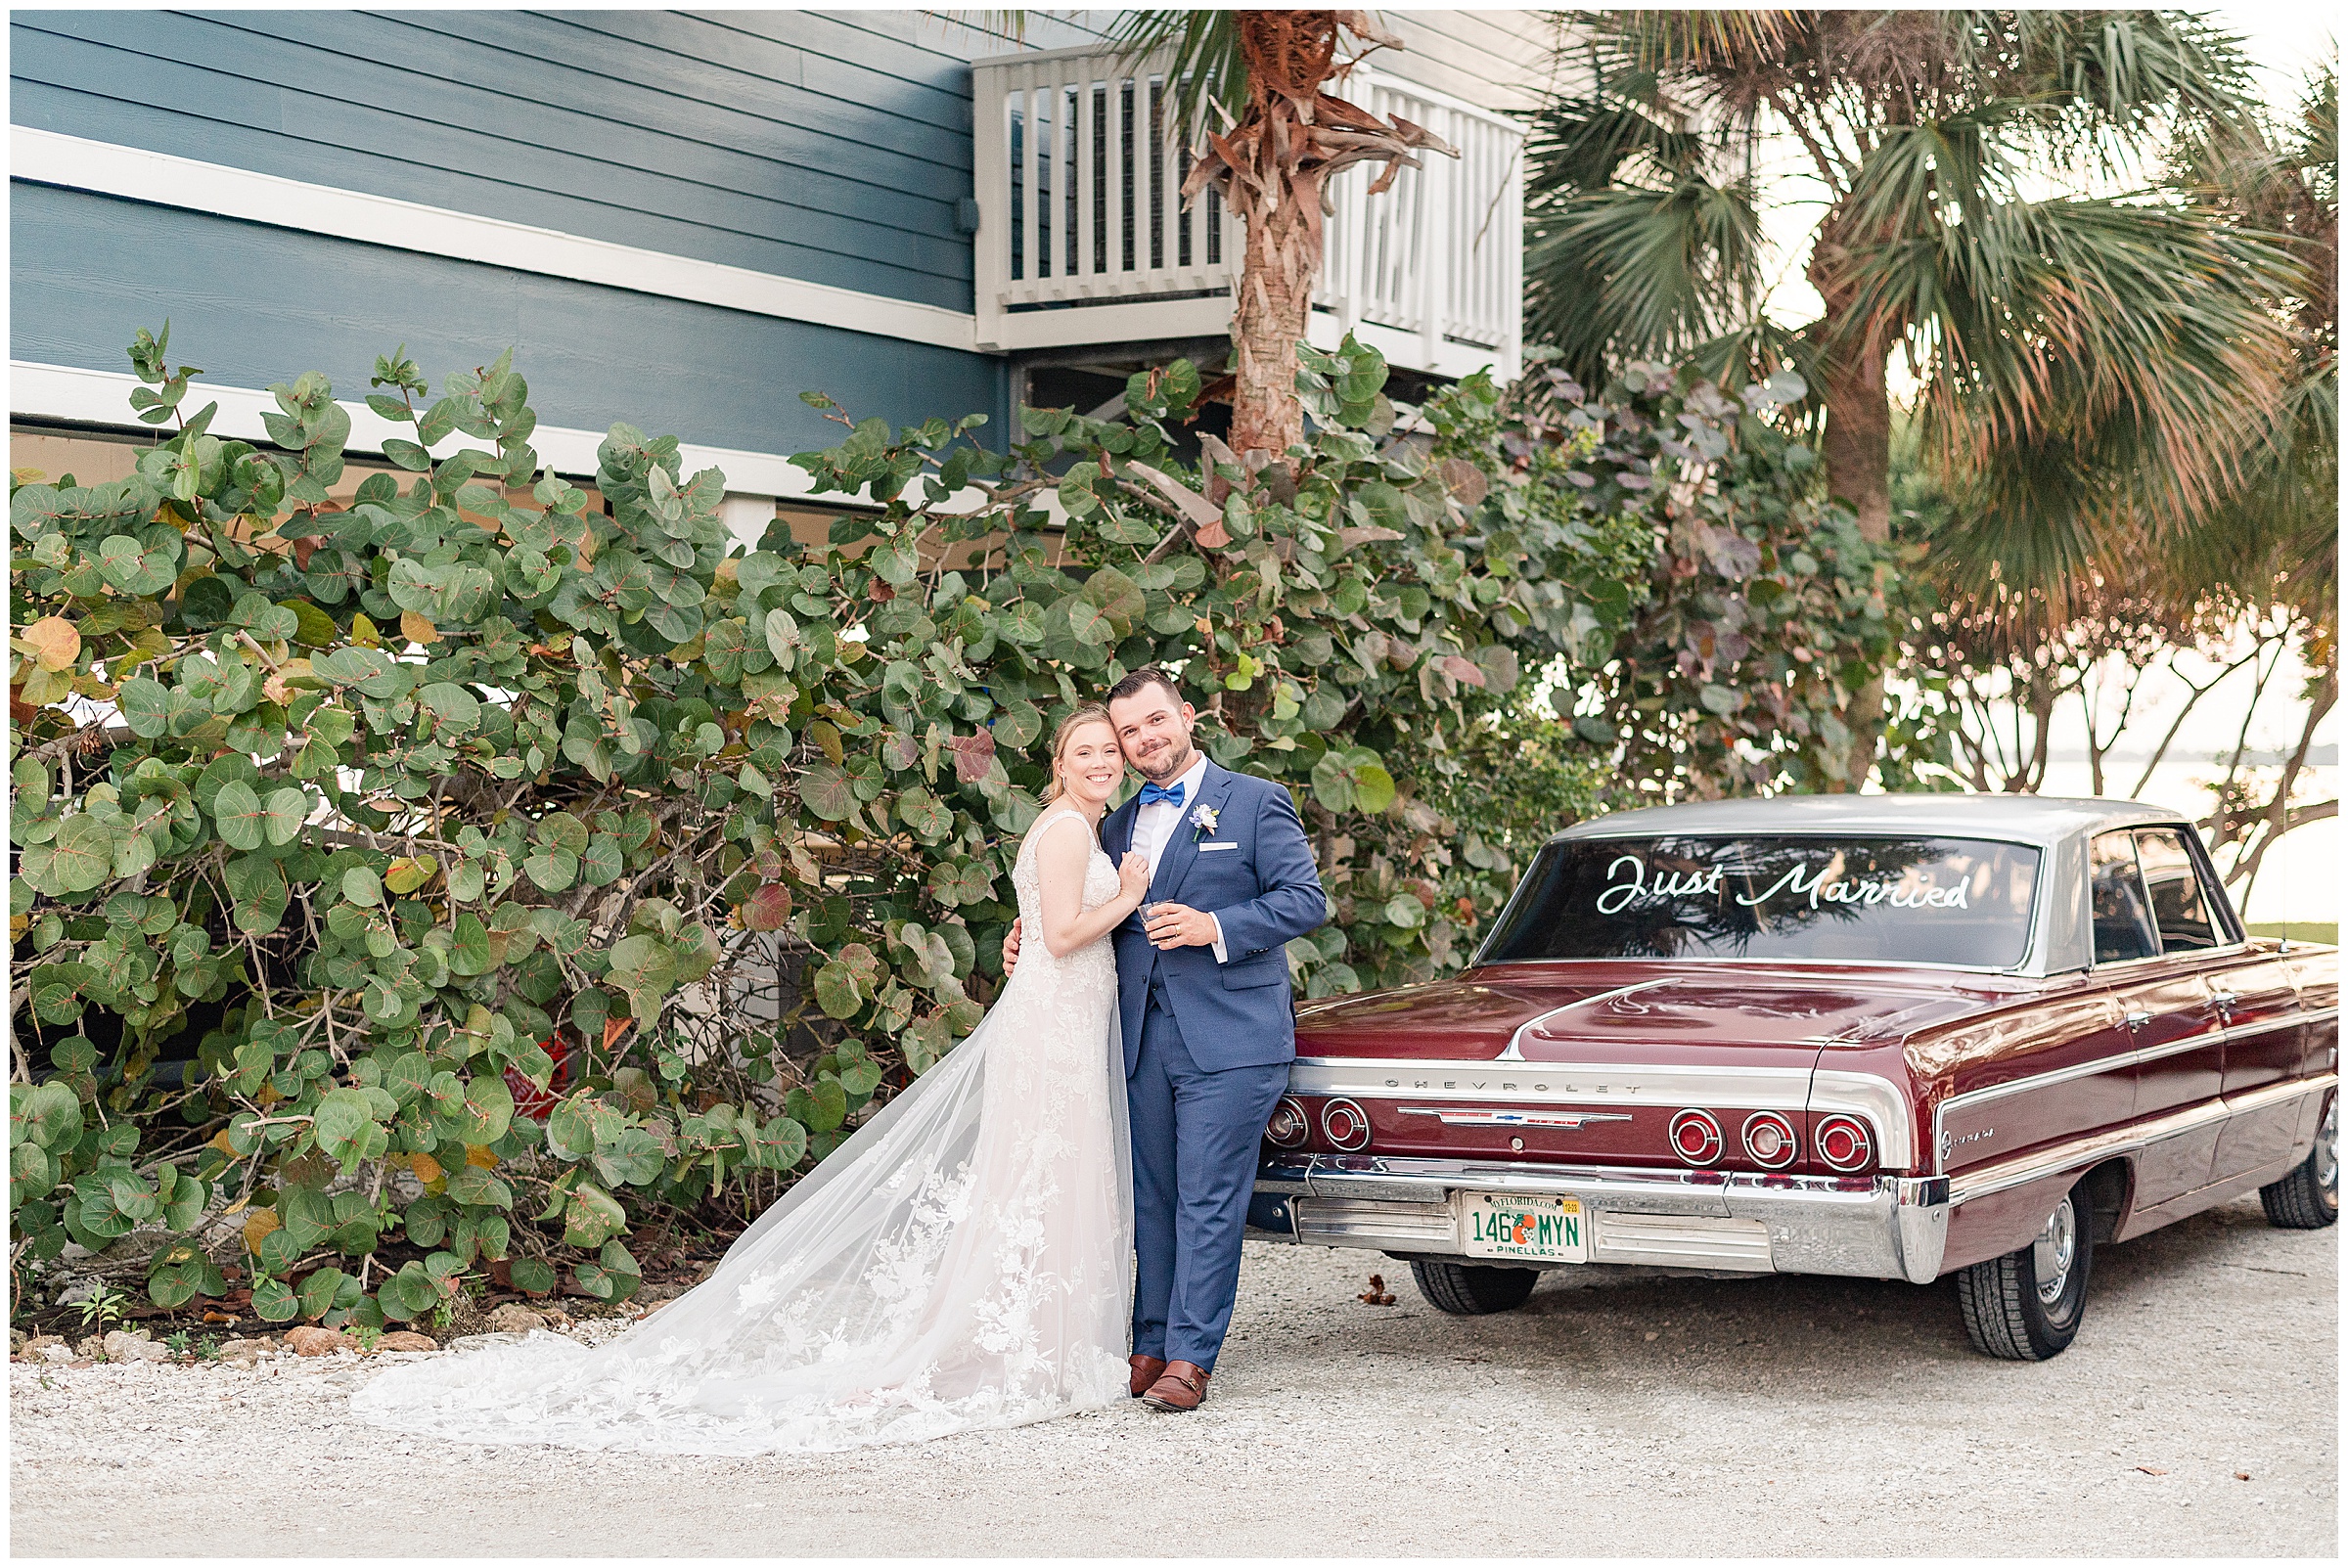 Bride and groom posing with old chevy car at their wedding at Tampa Bay Watch